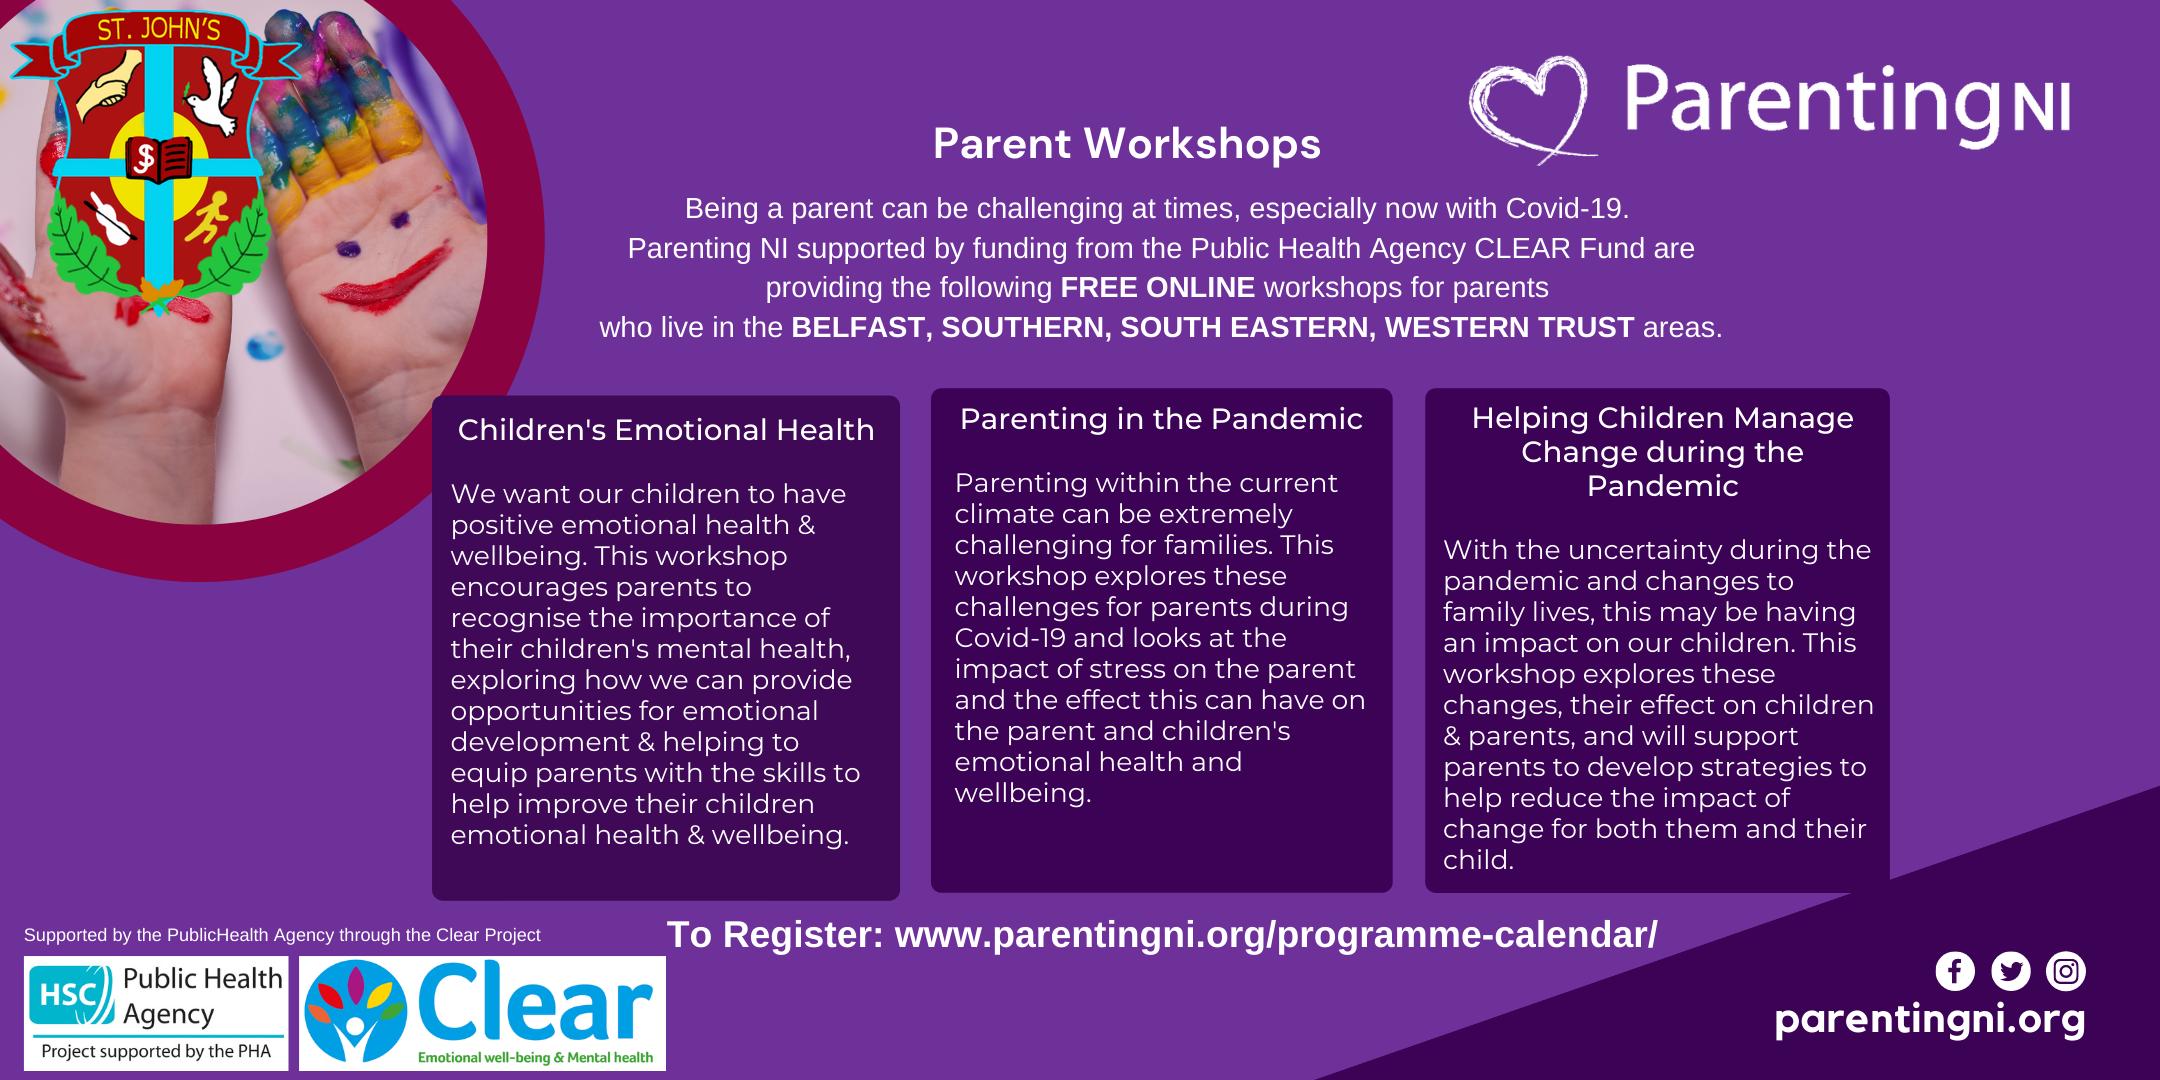 SAFEGUARDING: FREE ONLINE parenting courses and professionals sessions